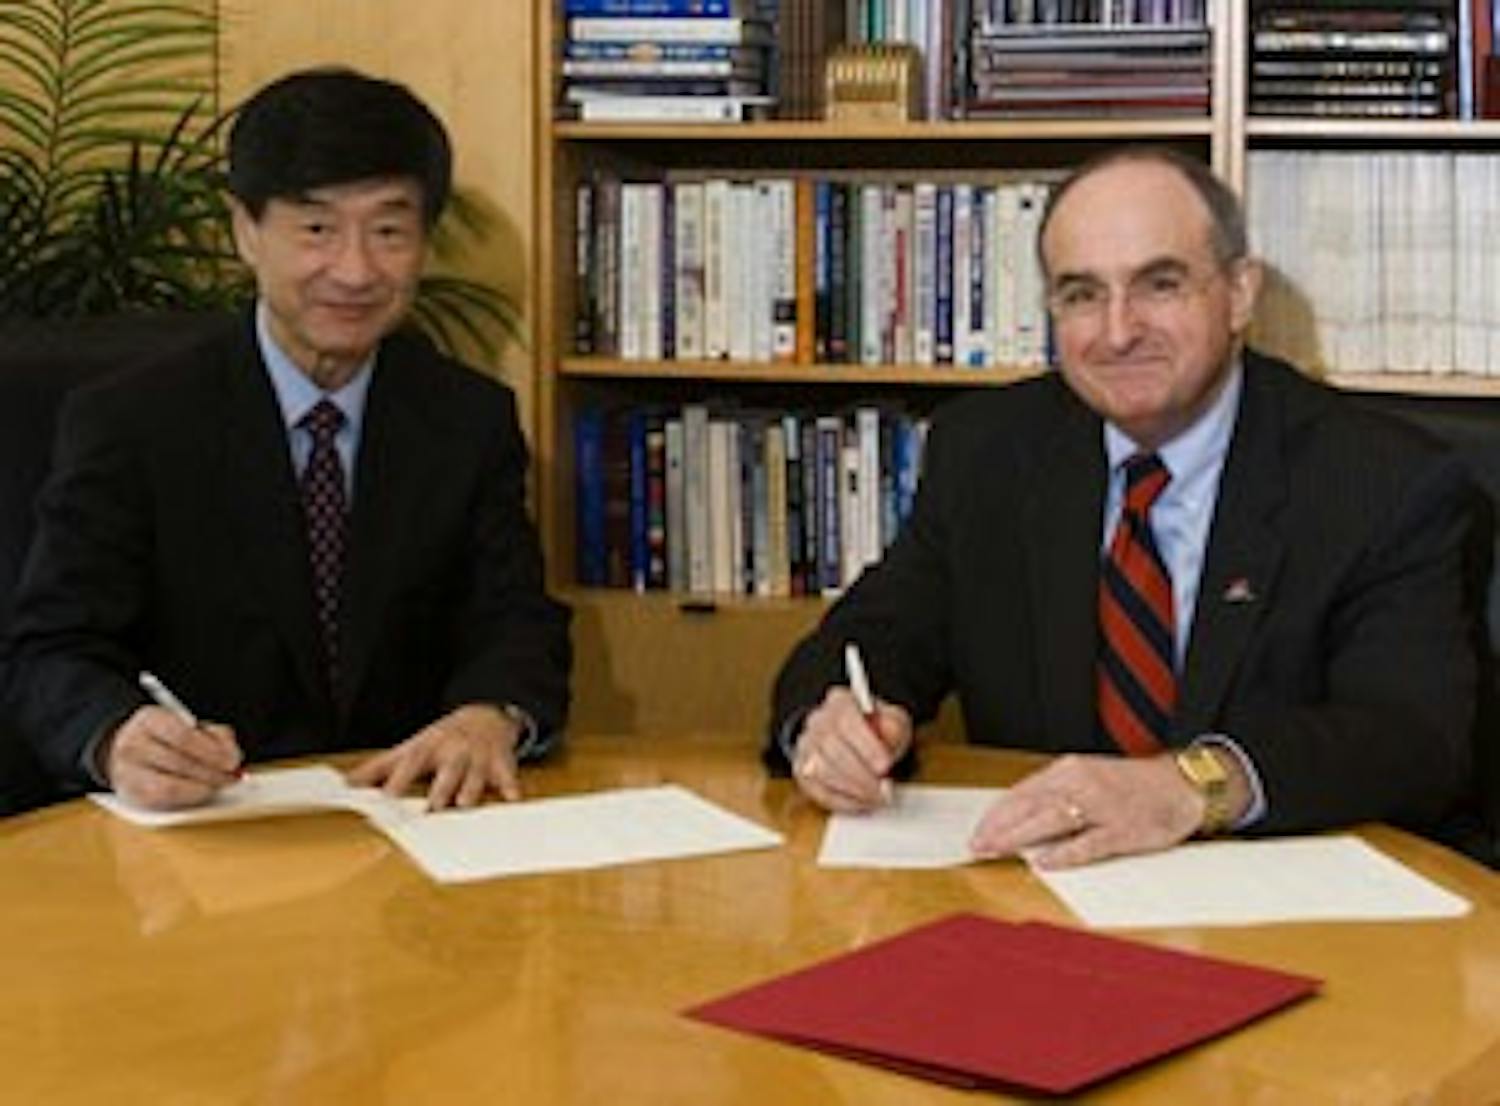 COURTESY PHOTO
Sungkyunkwan University President Jung-Don Seo and IU President Michael McRobbie sign an agreement to partner the two universities, allowing students from the South Korea university to attend both universities and receive two degrees.